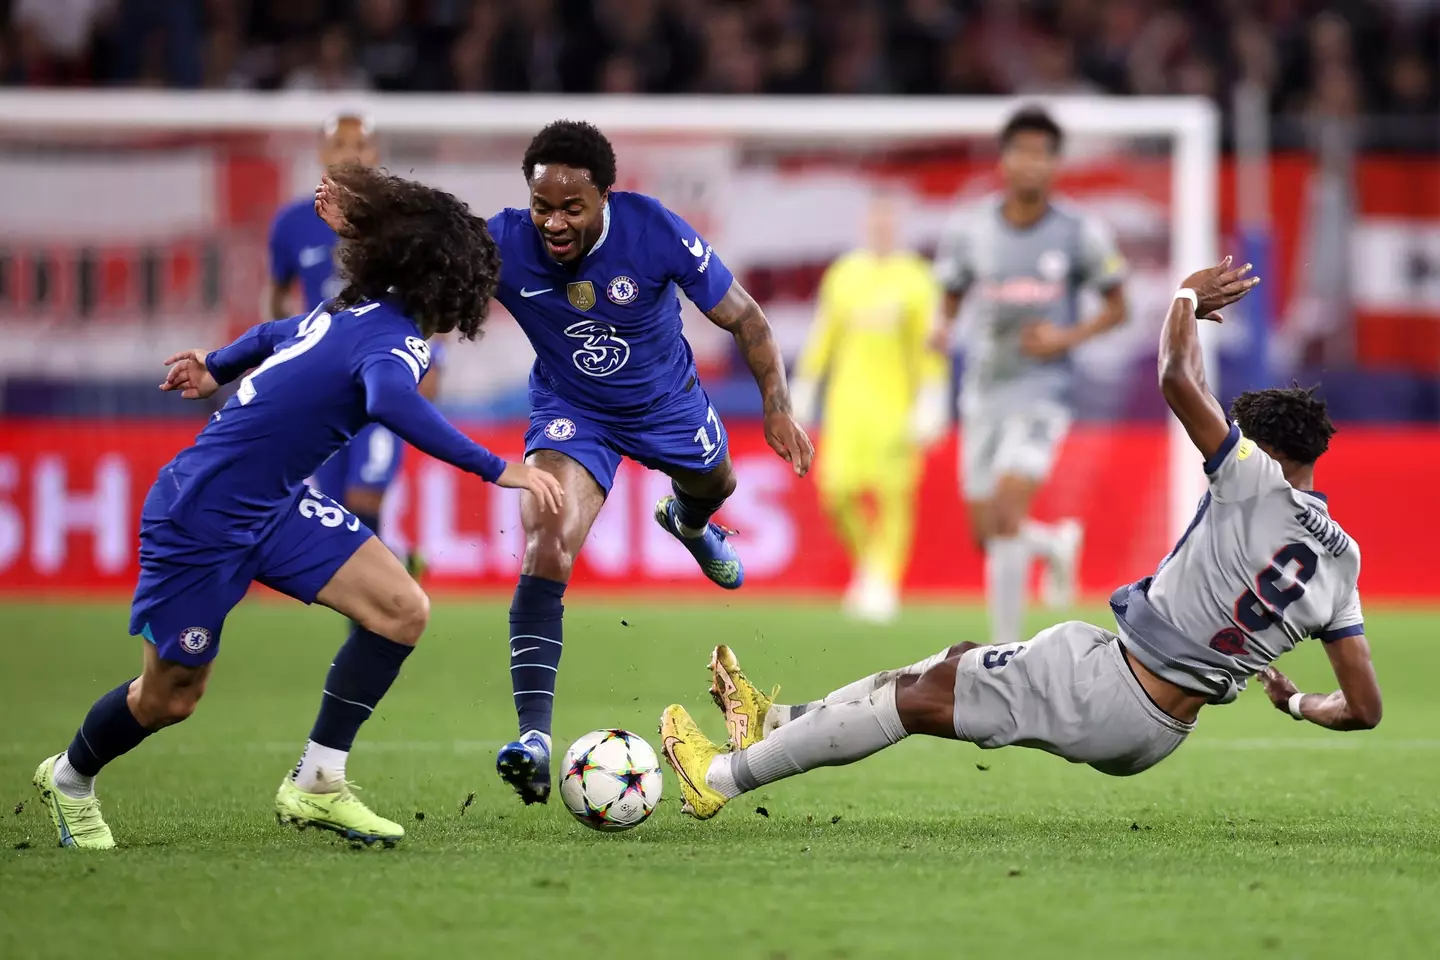 RB Salzburg's Junior Adamu (right) tackles Chelsea's Raheem Sterling during the UEFA Champions League group E match at the Red Bull Arena in Salzburg. (Alamy)